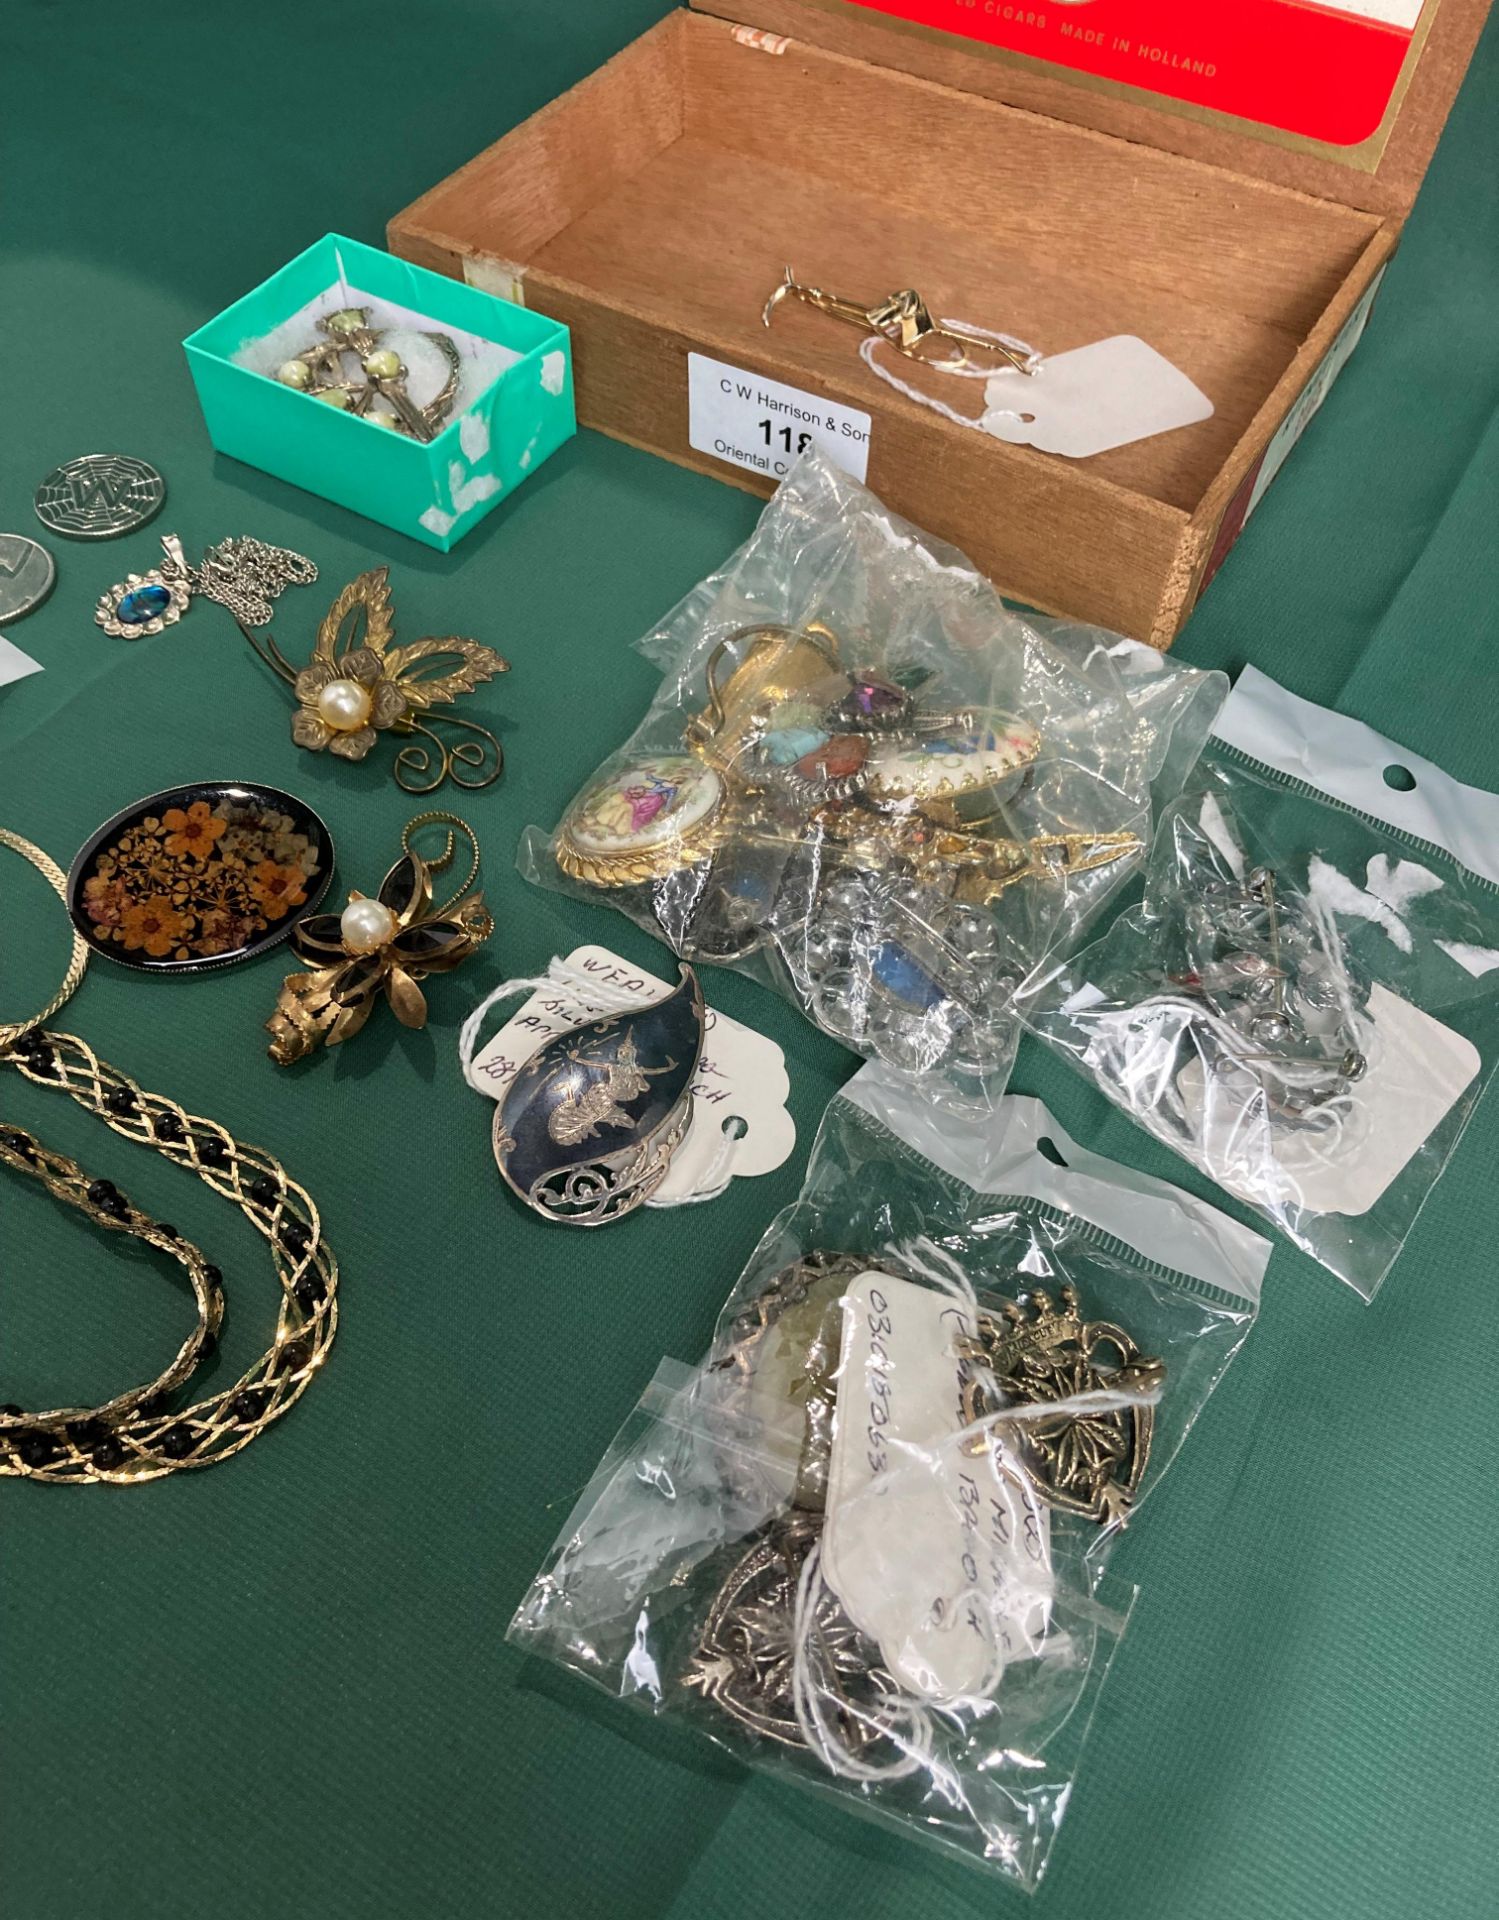 Contents to cigar box - assorted costume jewellery including Scottish brooches, chains, - Image 3 of 4